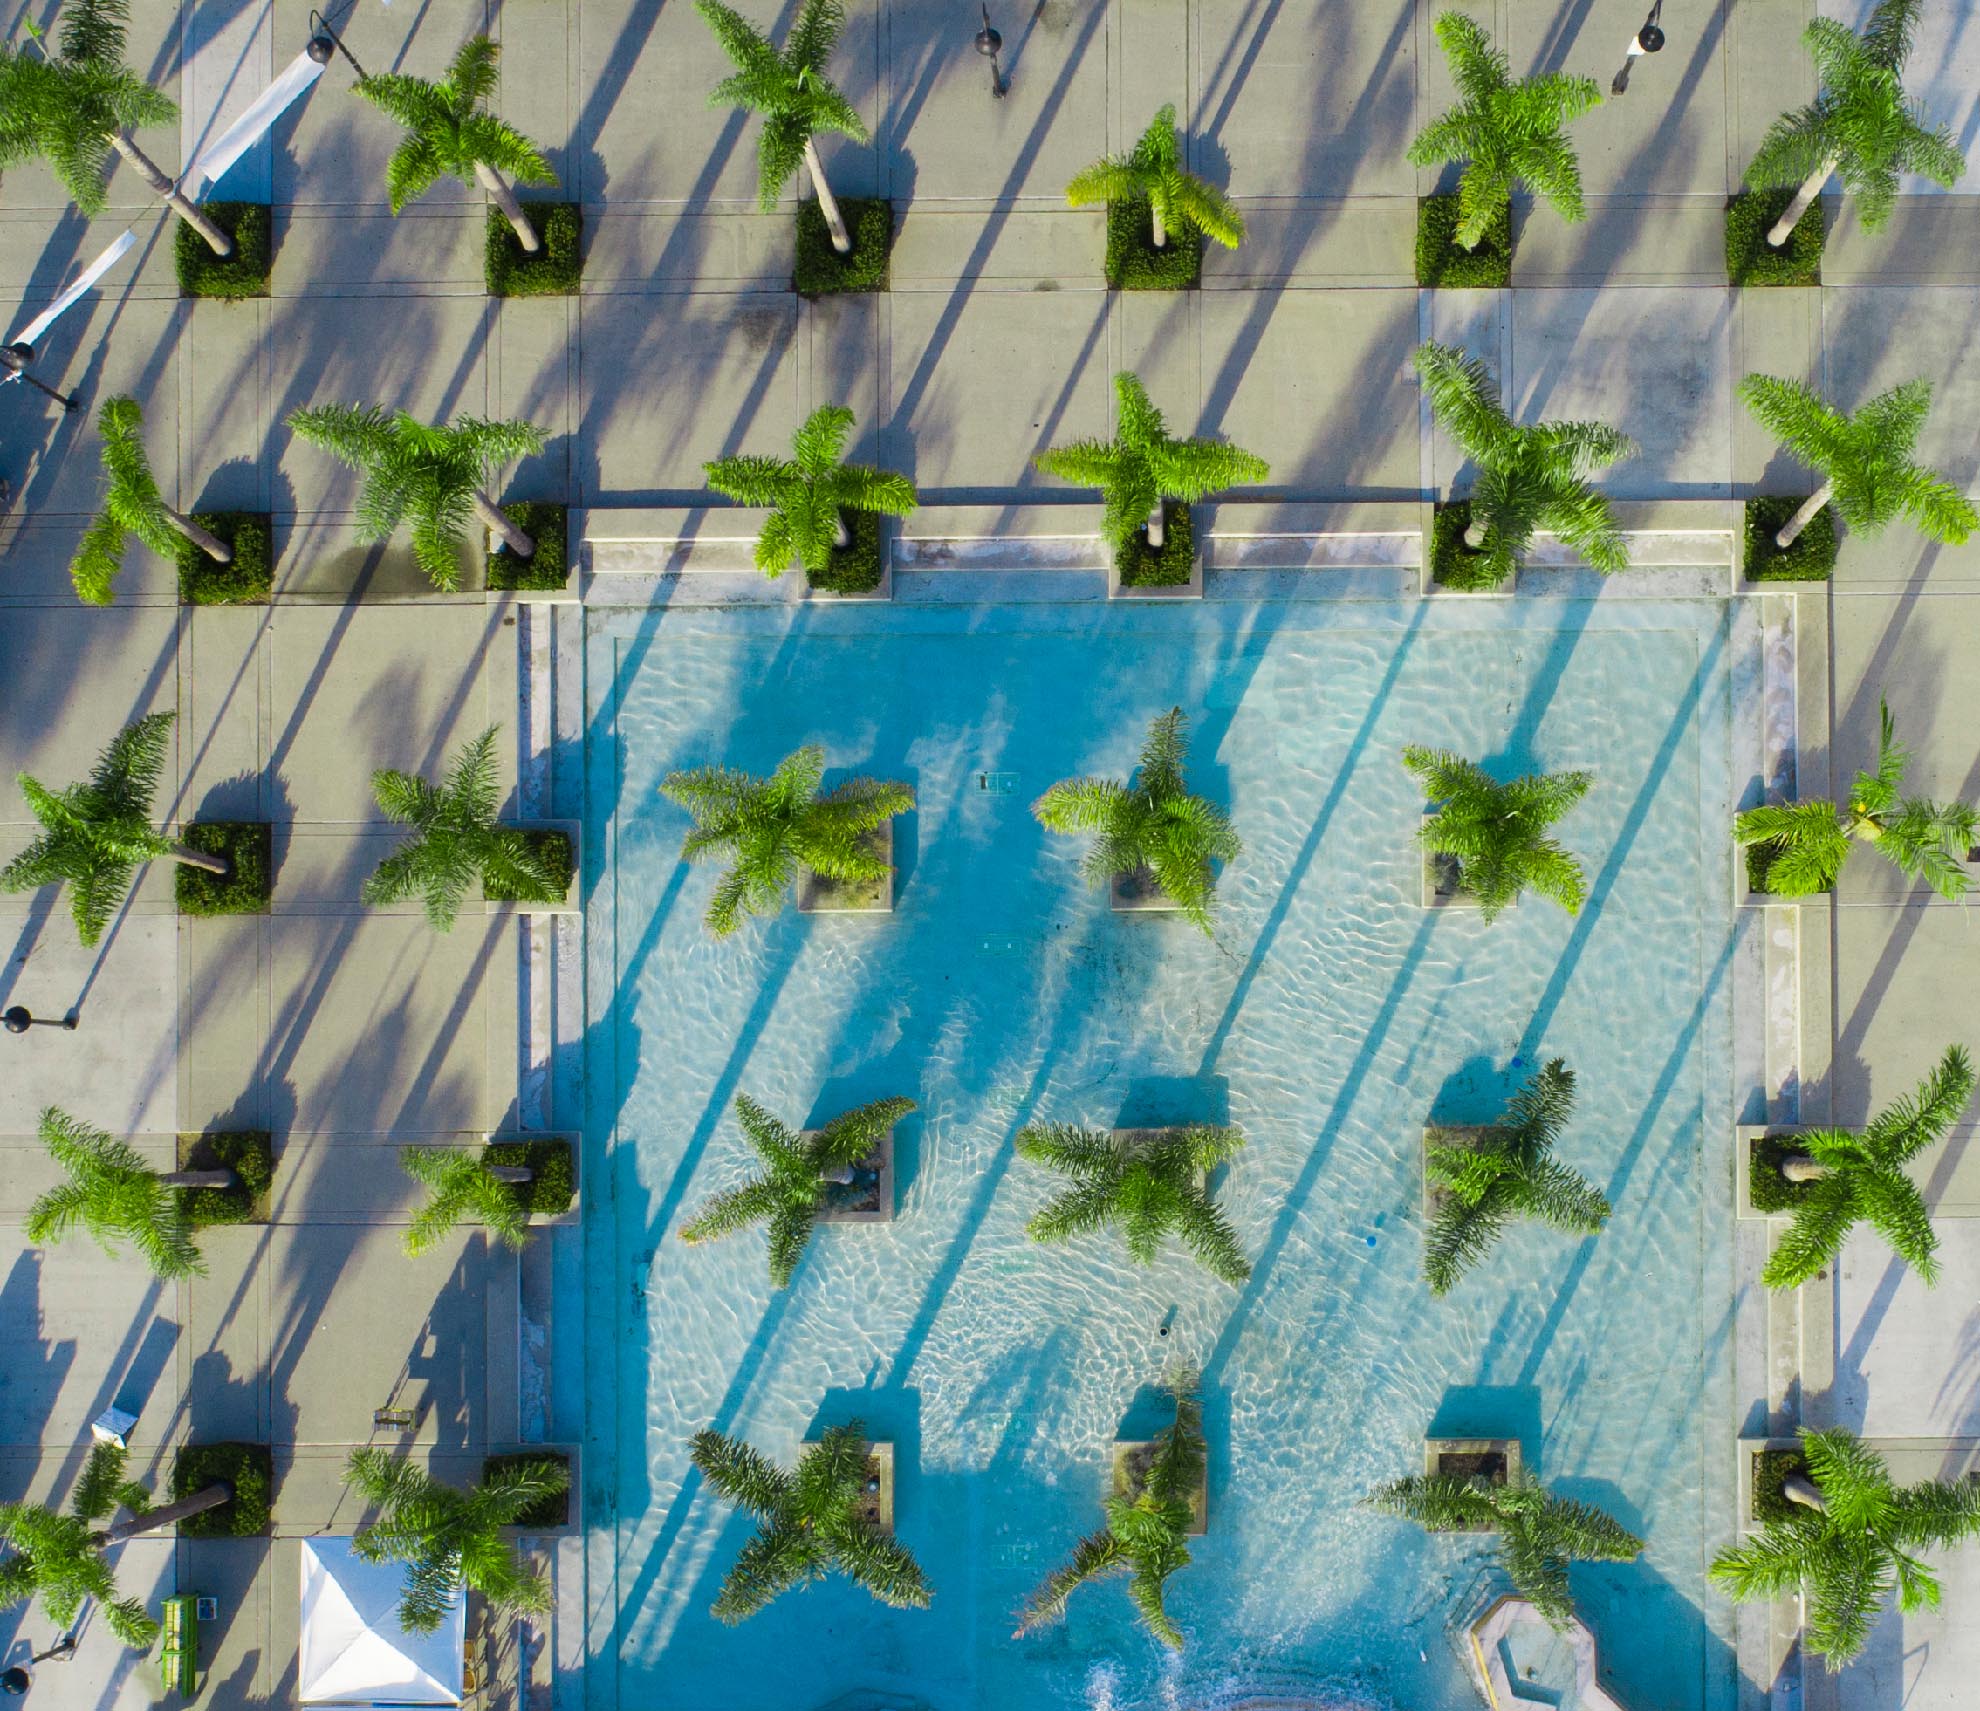 Drone Photograph of Birds eye view of Oceanside Civic Centers palm trees and pool